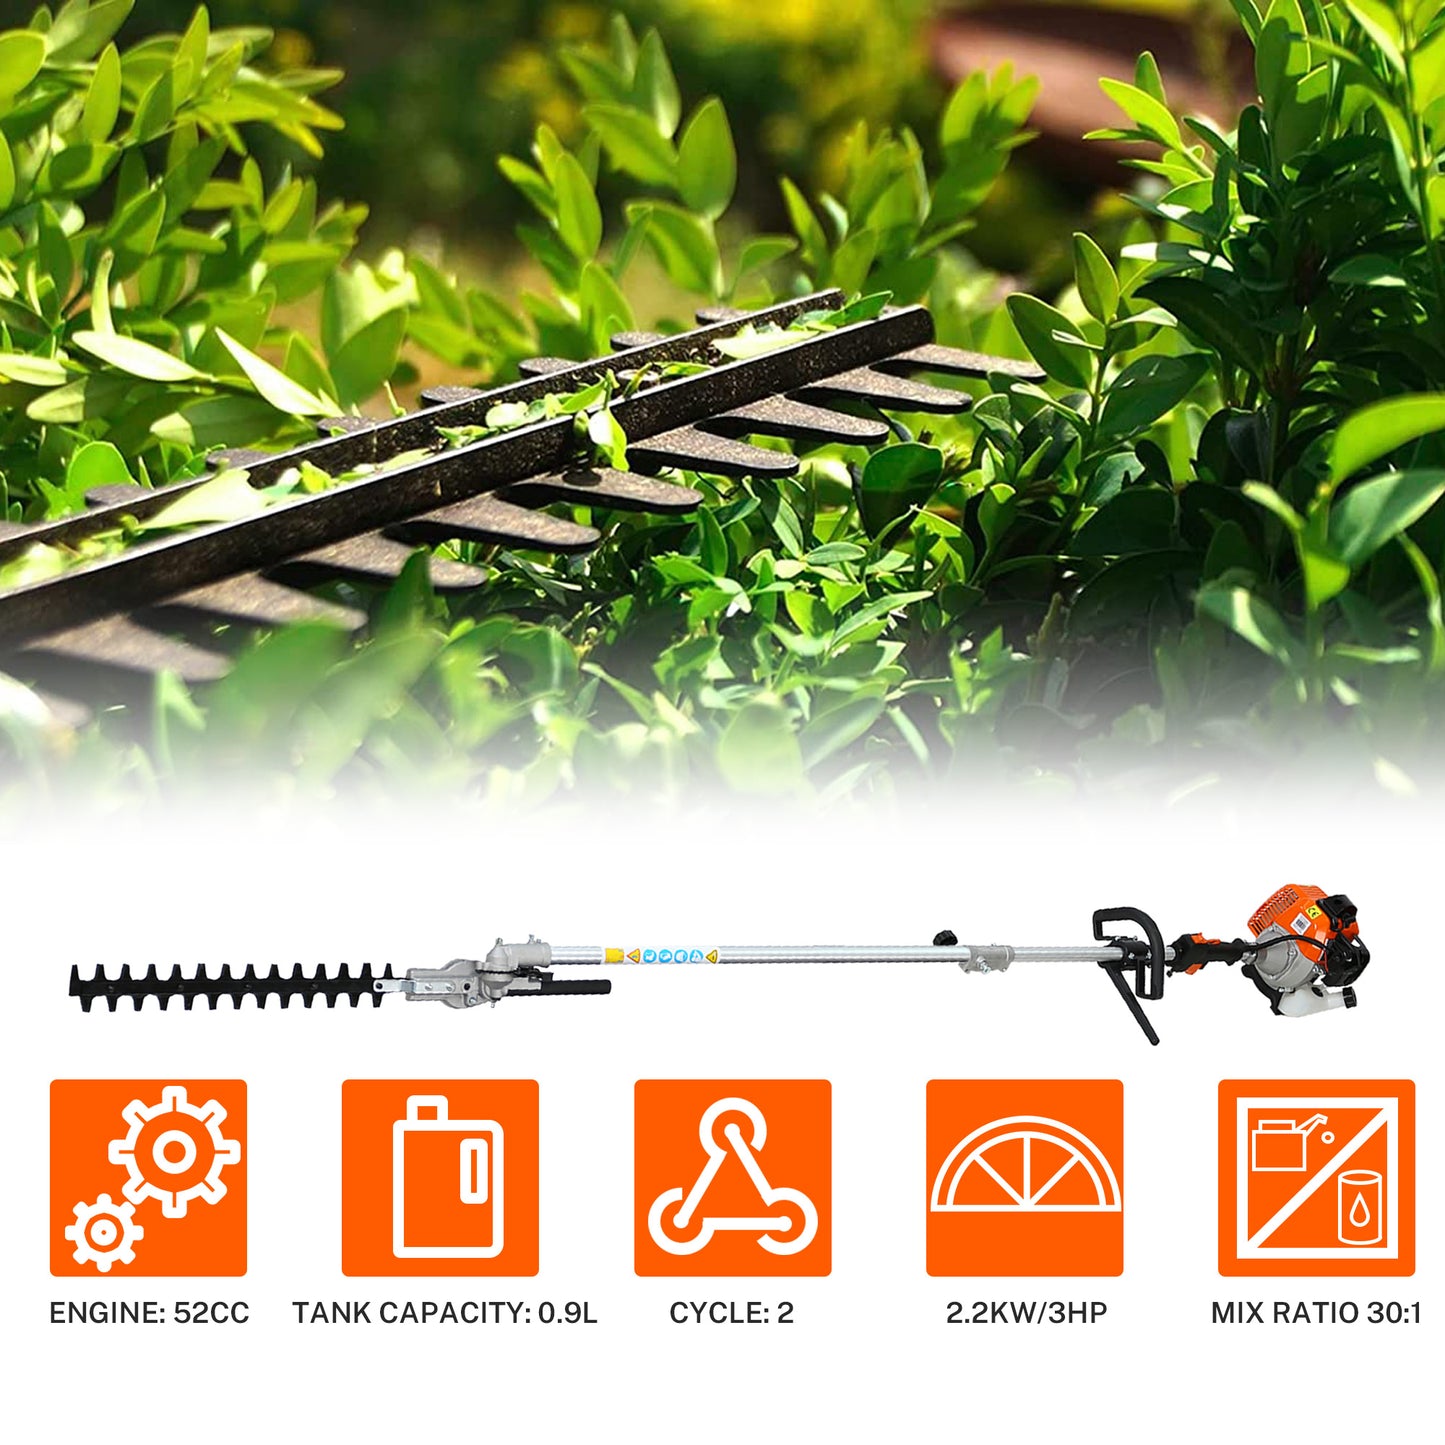 SYNGAR 33CC 2-Cycle Weed Eater, 4-in-1 Gas Powered Full Crank Shaft String Trimmer with Gas Pole Saw, Hedge Trimmer and Brush Cutter, Trimming Tool System for Grass Lawn Garden Yard Care, Y013